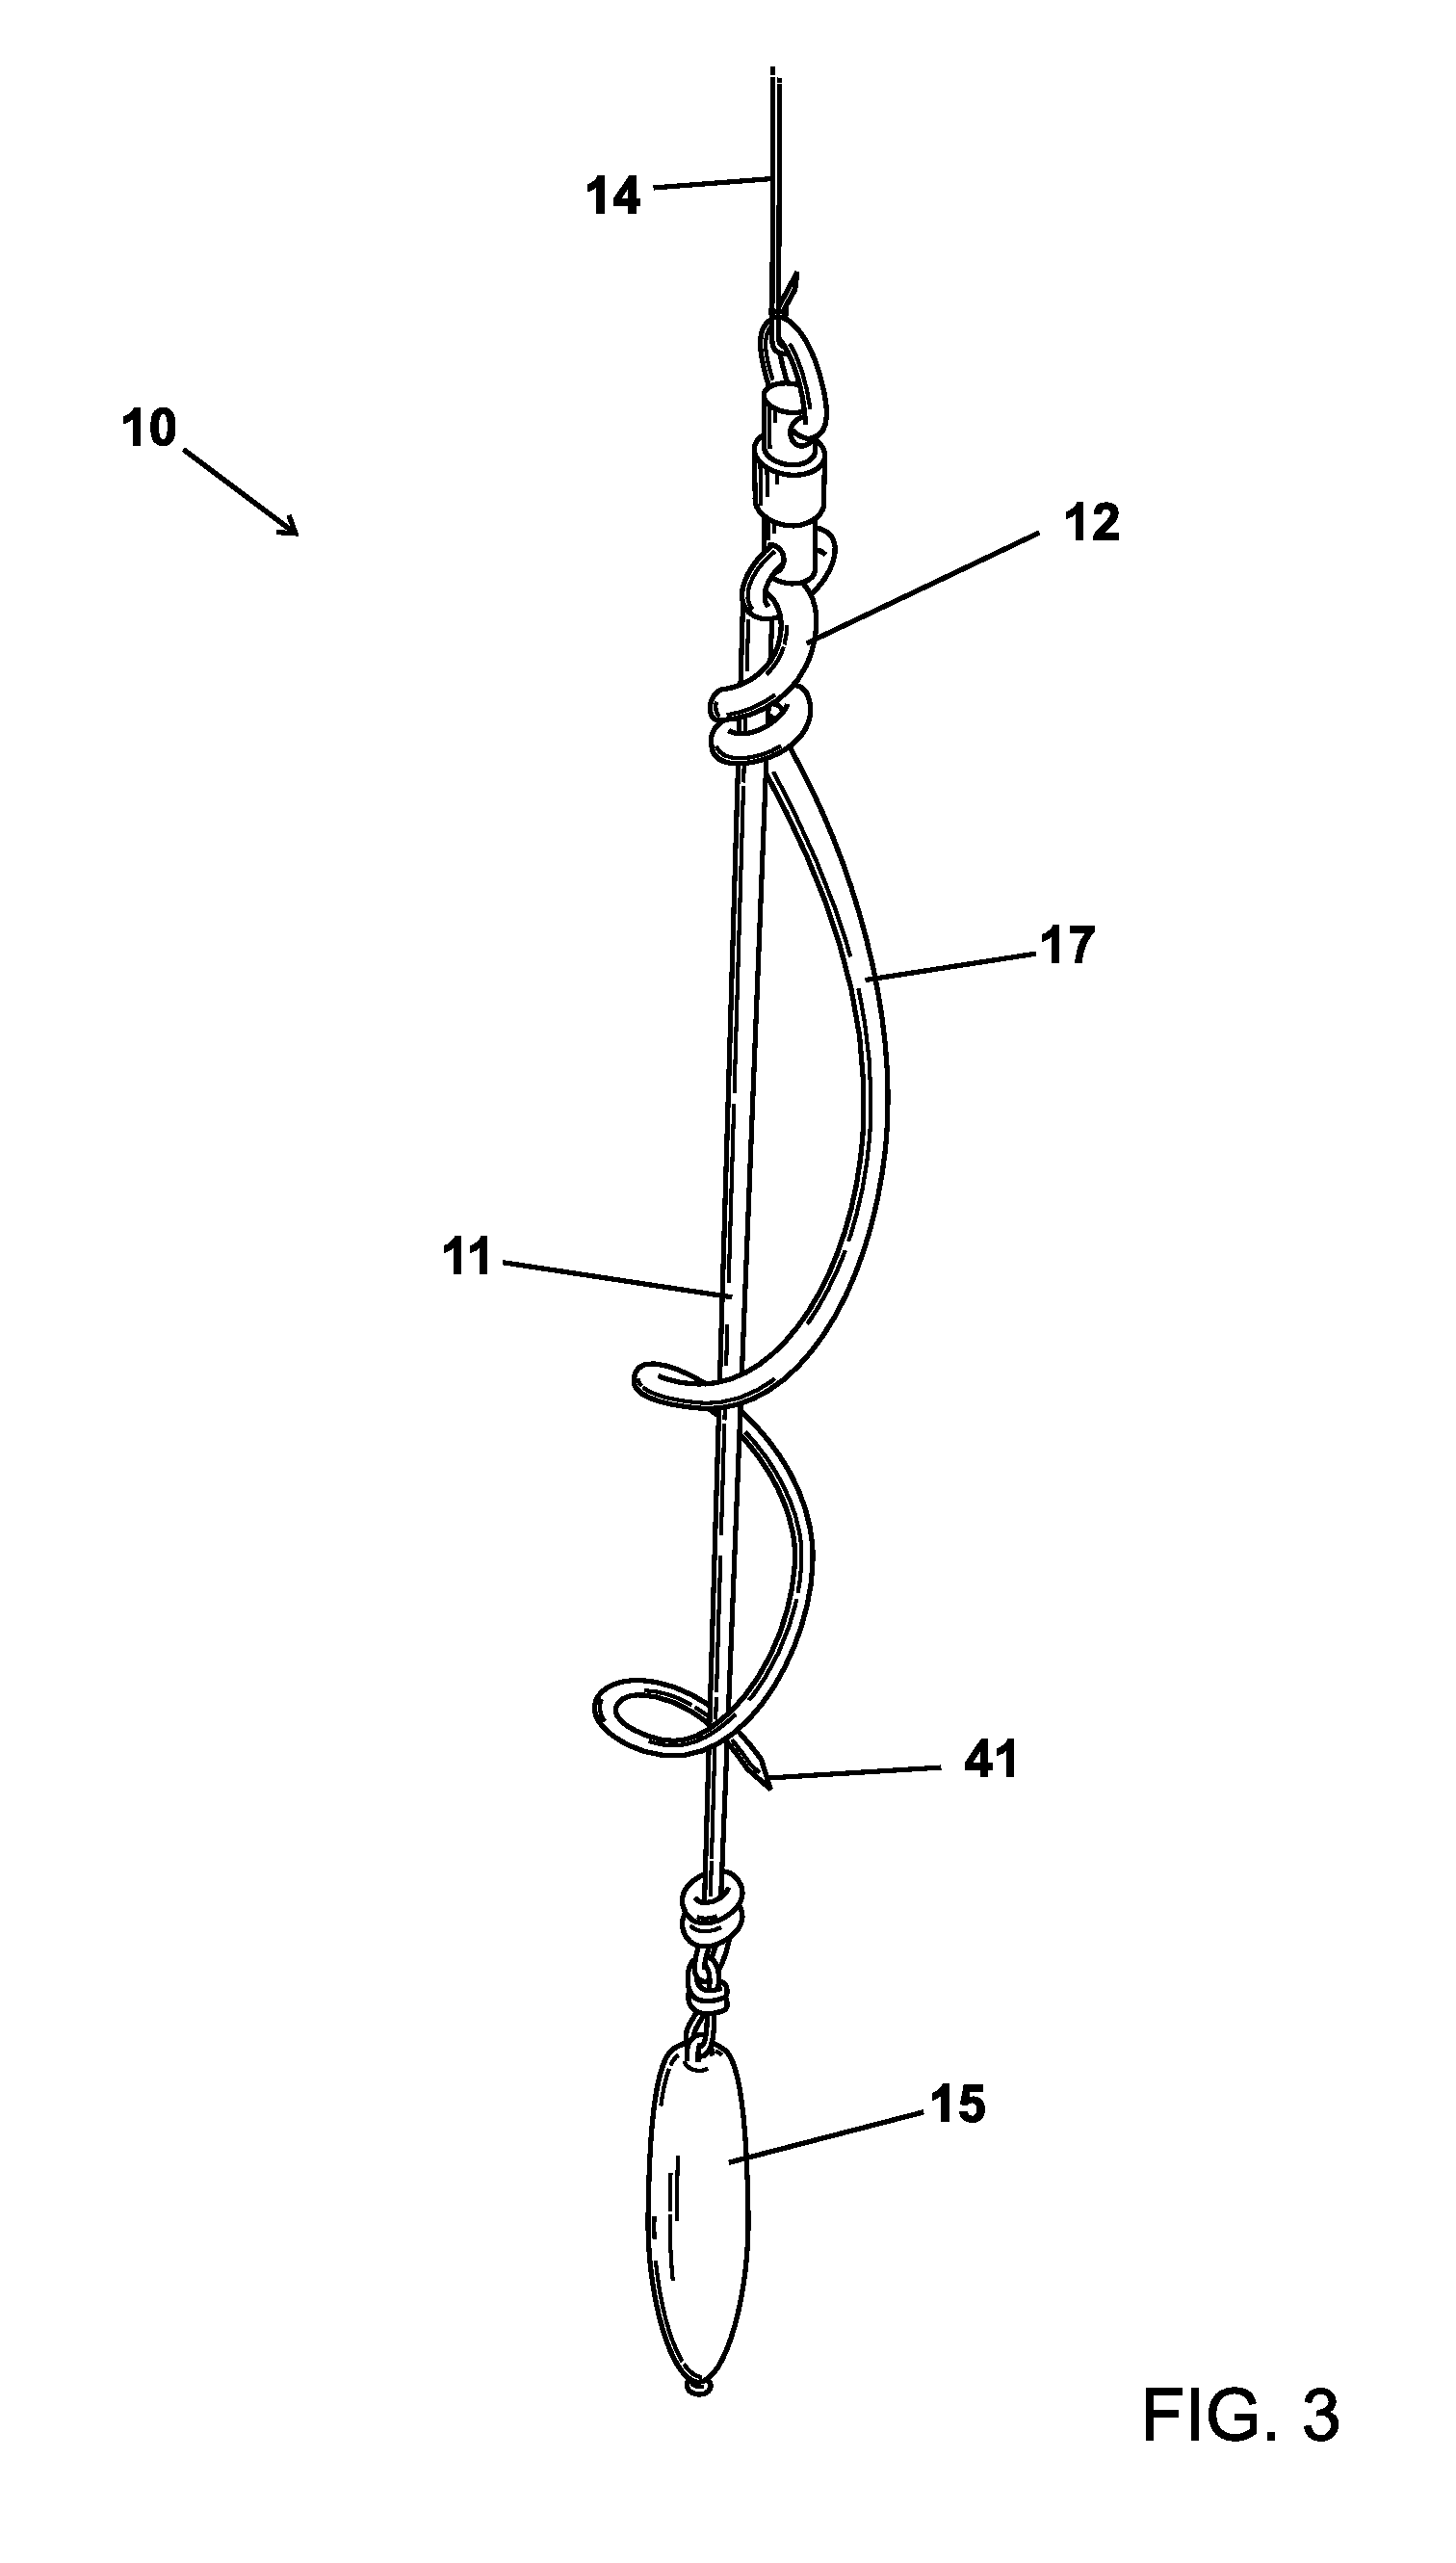 Deepwater fish release device